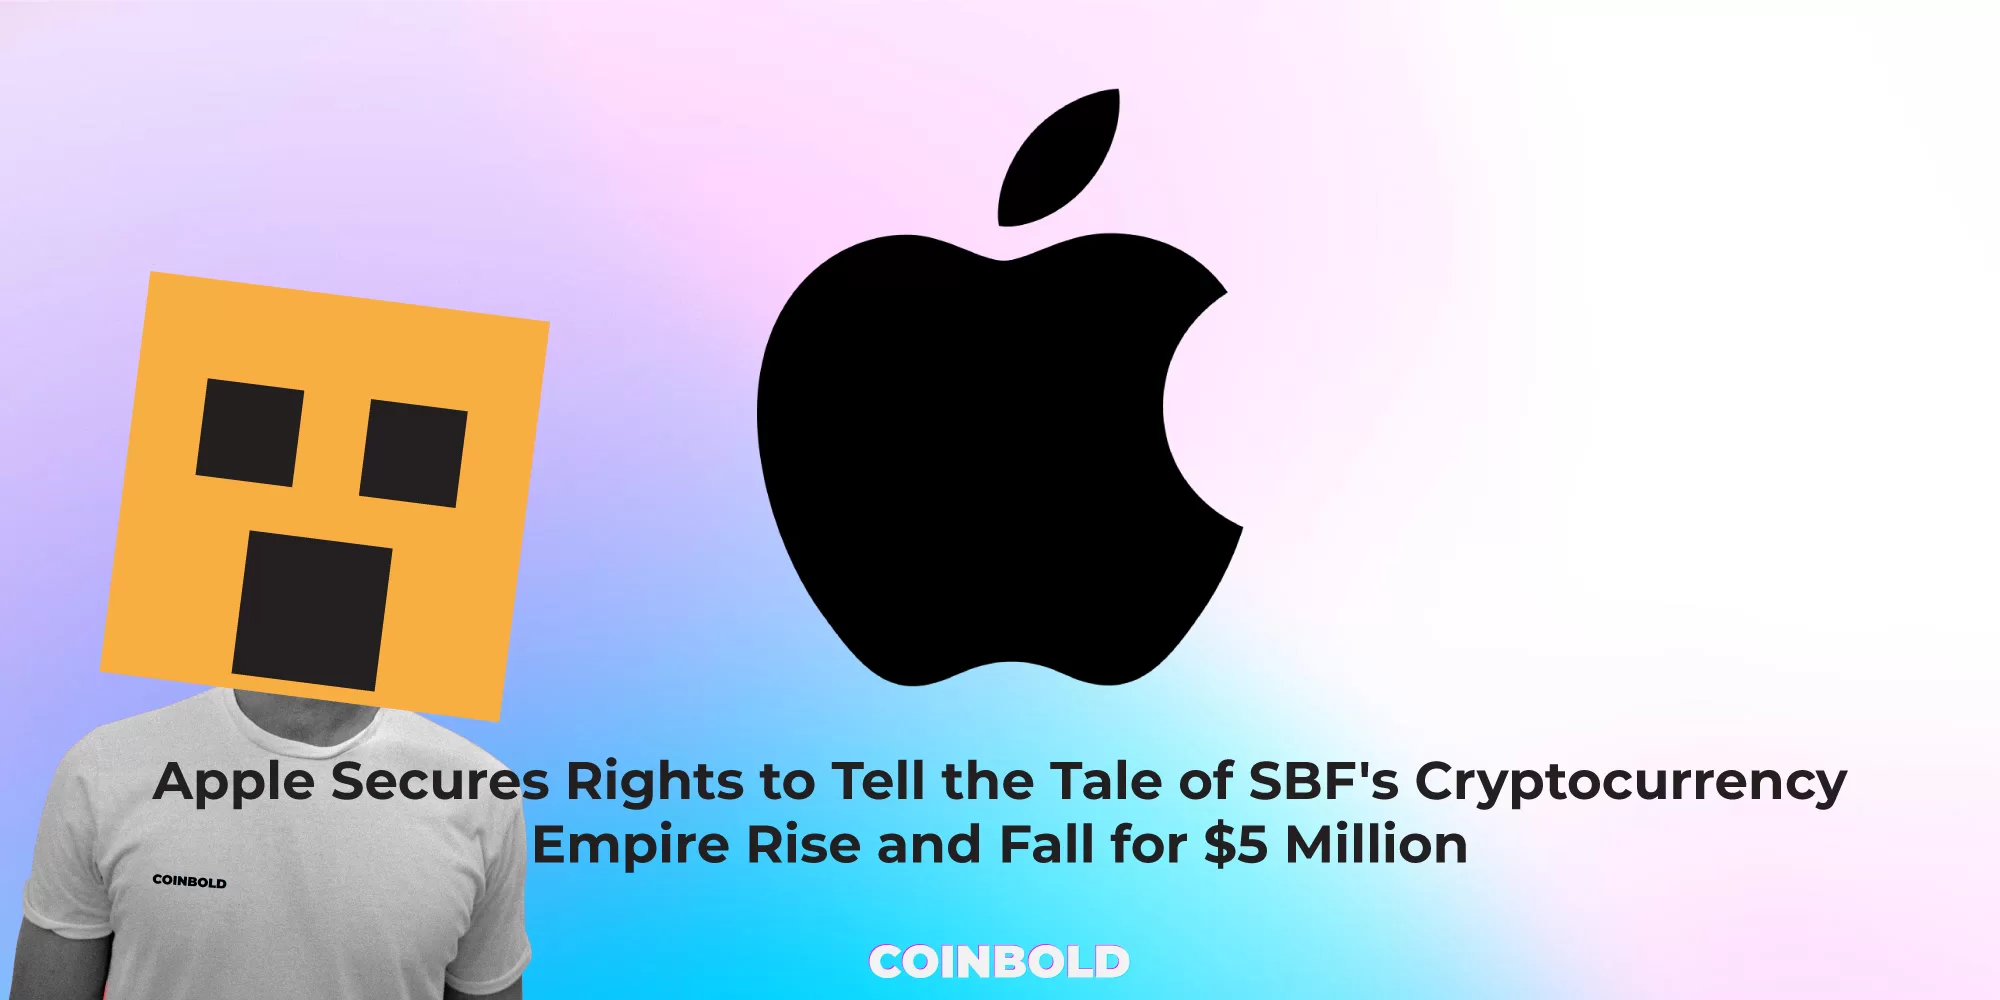 Apple Secures Rights to Tell the Tale of SBF's Cryptocurrency Empire Rise and Fall for $5 Million